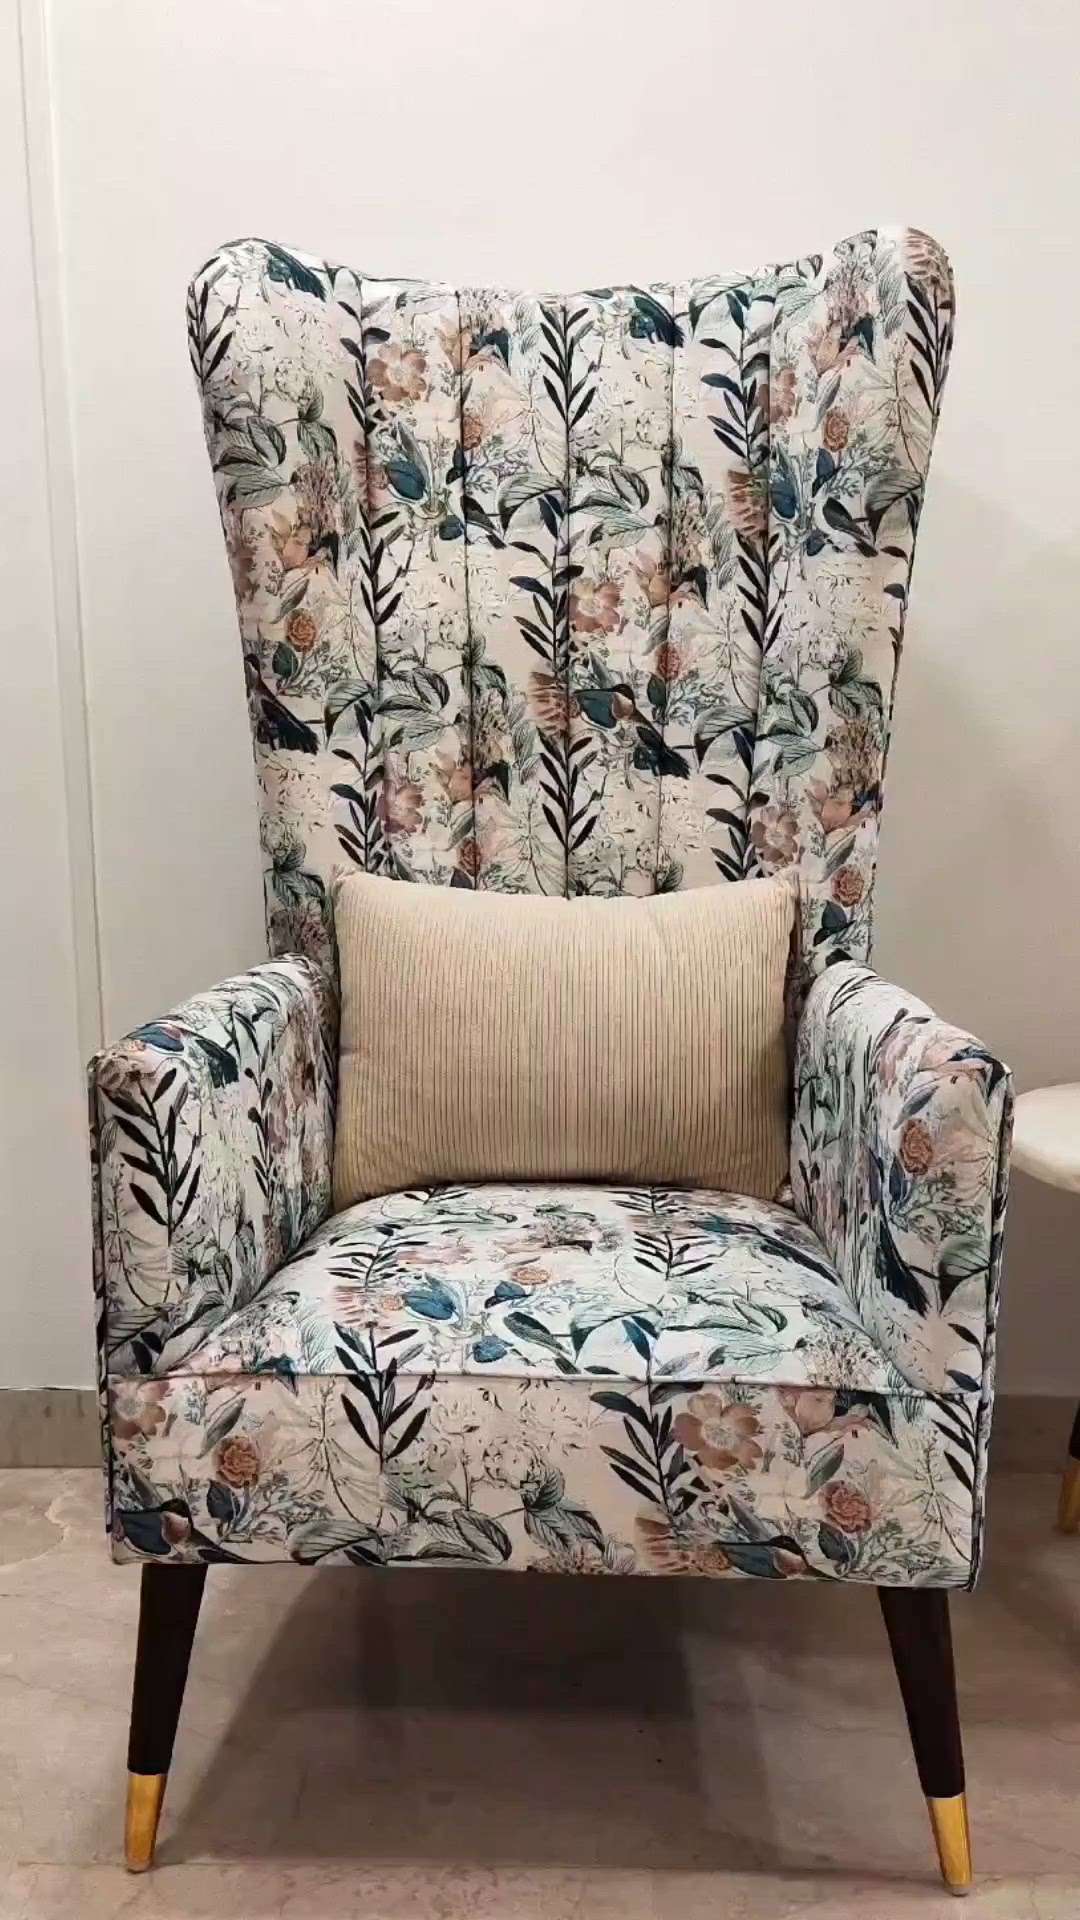 11000 per sheet or chair without fabric